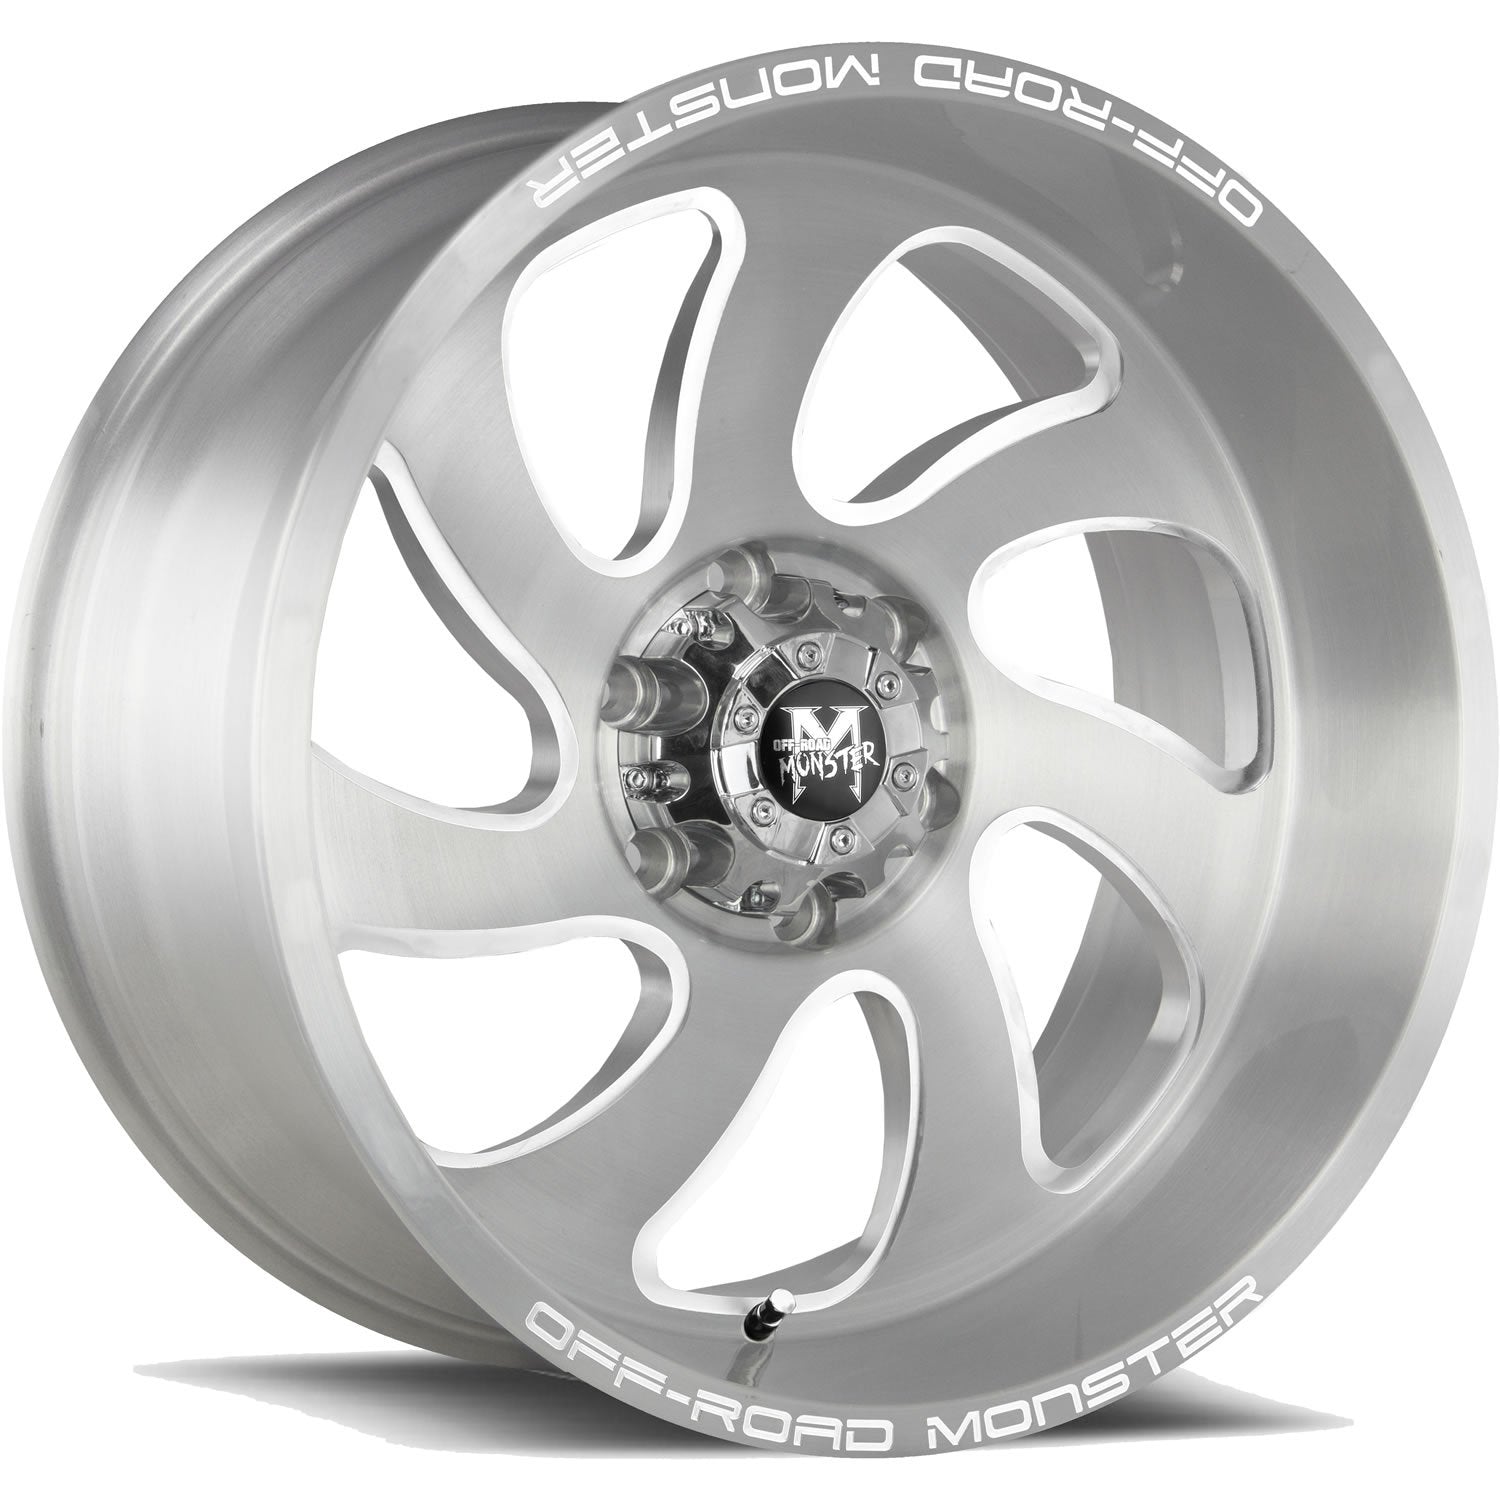 Off-Road Monster M07 24x12 -44 6x139.7 (6x5.5) Brushed Face Silver